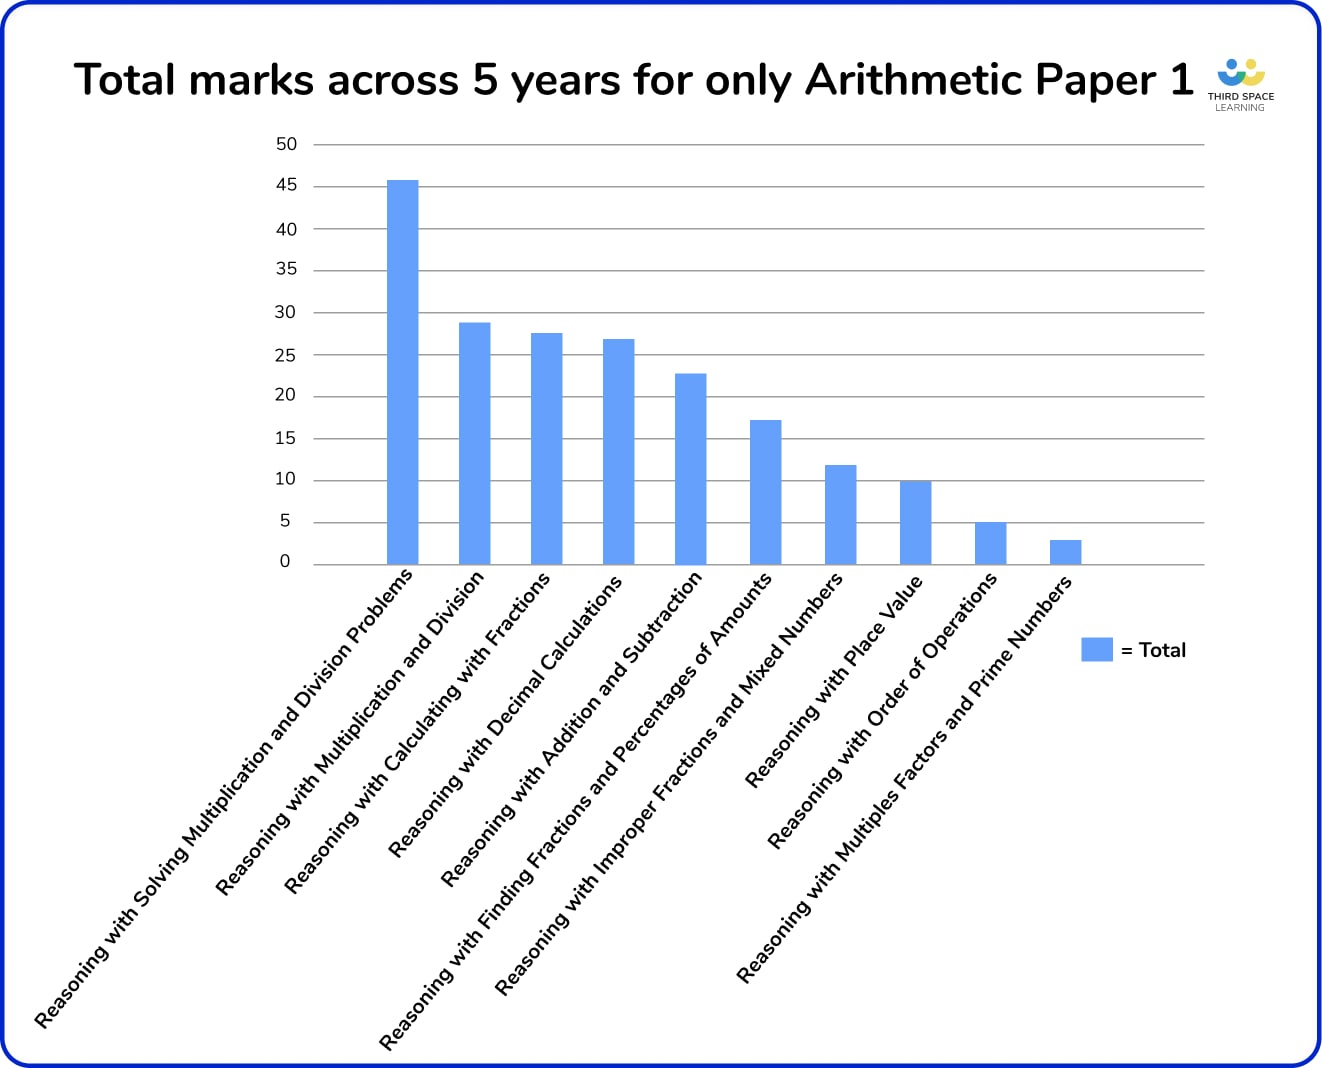 A graph to show total marks across 5 years for only SATs Arithmetic Paper 1